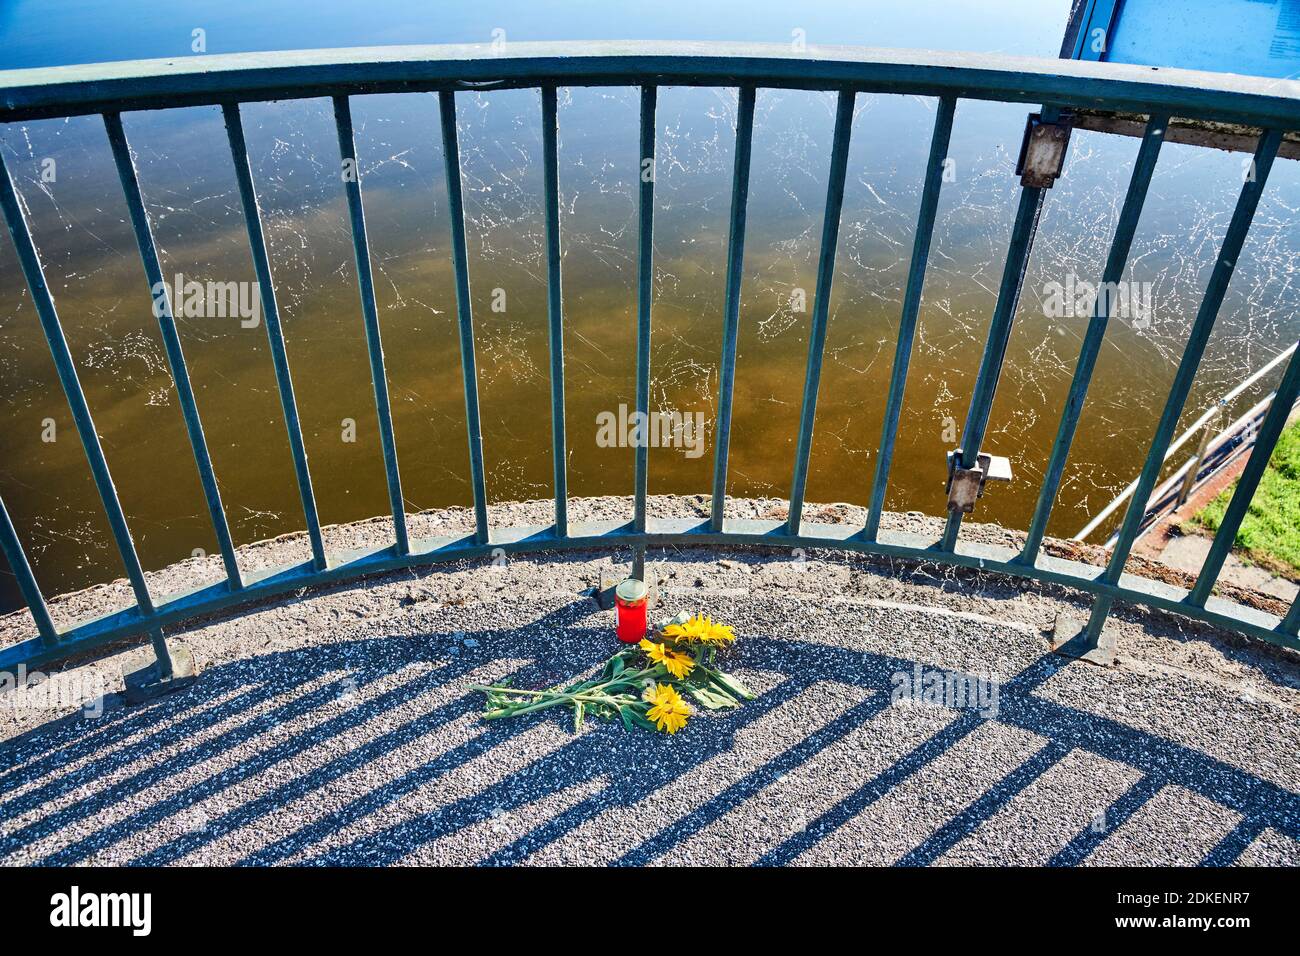 Mourning, accident, memorial, commemoration of a fatality, Germany, Northern Germany, Schleswig-Holstein, Elbe, Elbe bridge Geesthacht, bridgehead of the barrage, railing, bouquet of flowers, red mourning candle, shadow, cobwebs Stock Photo